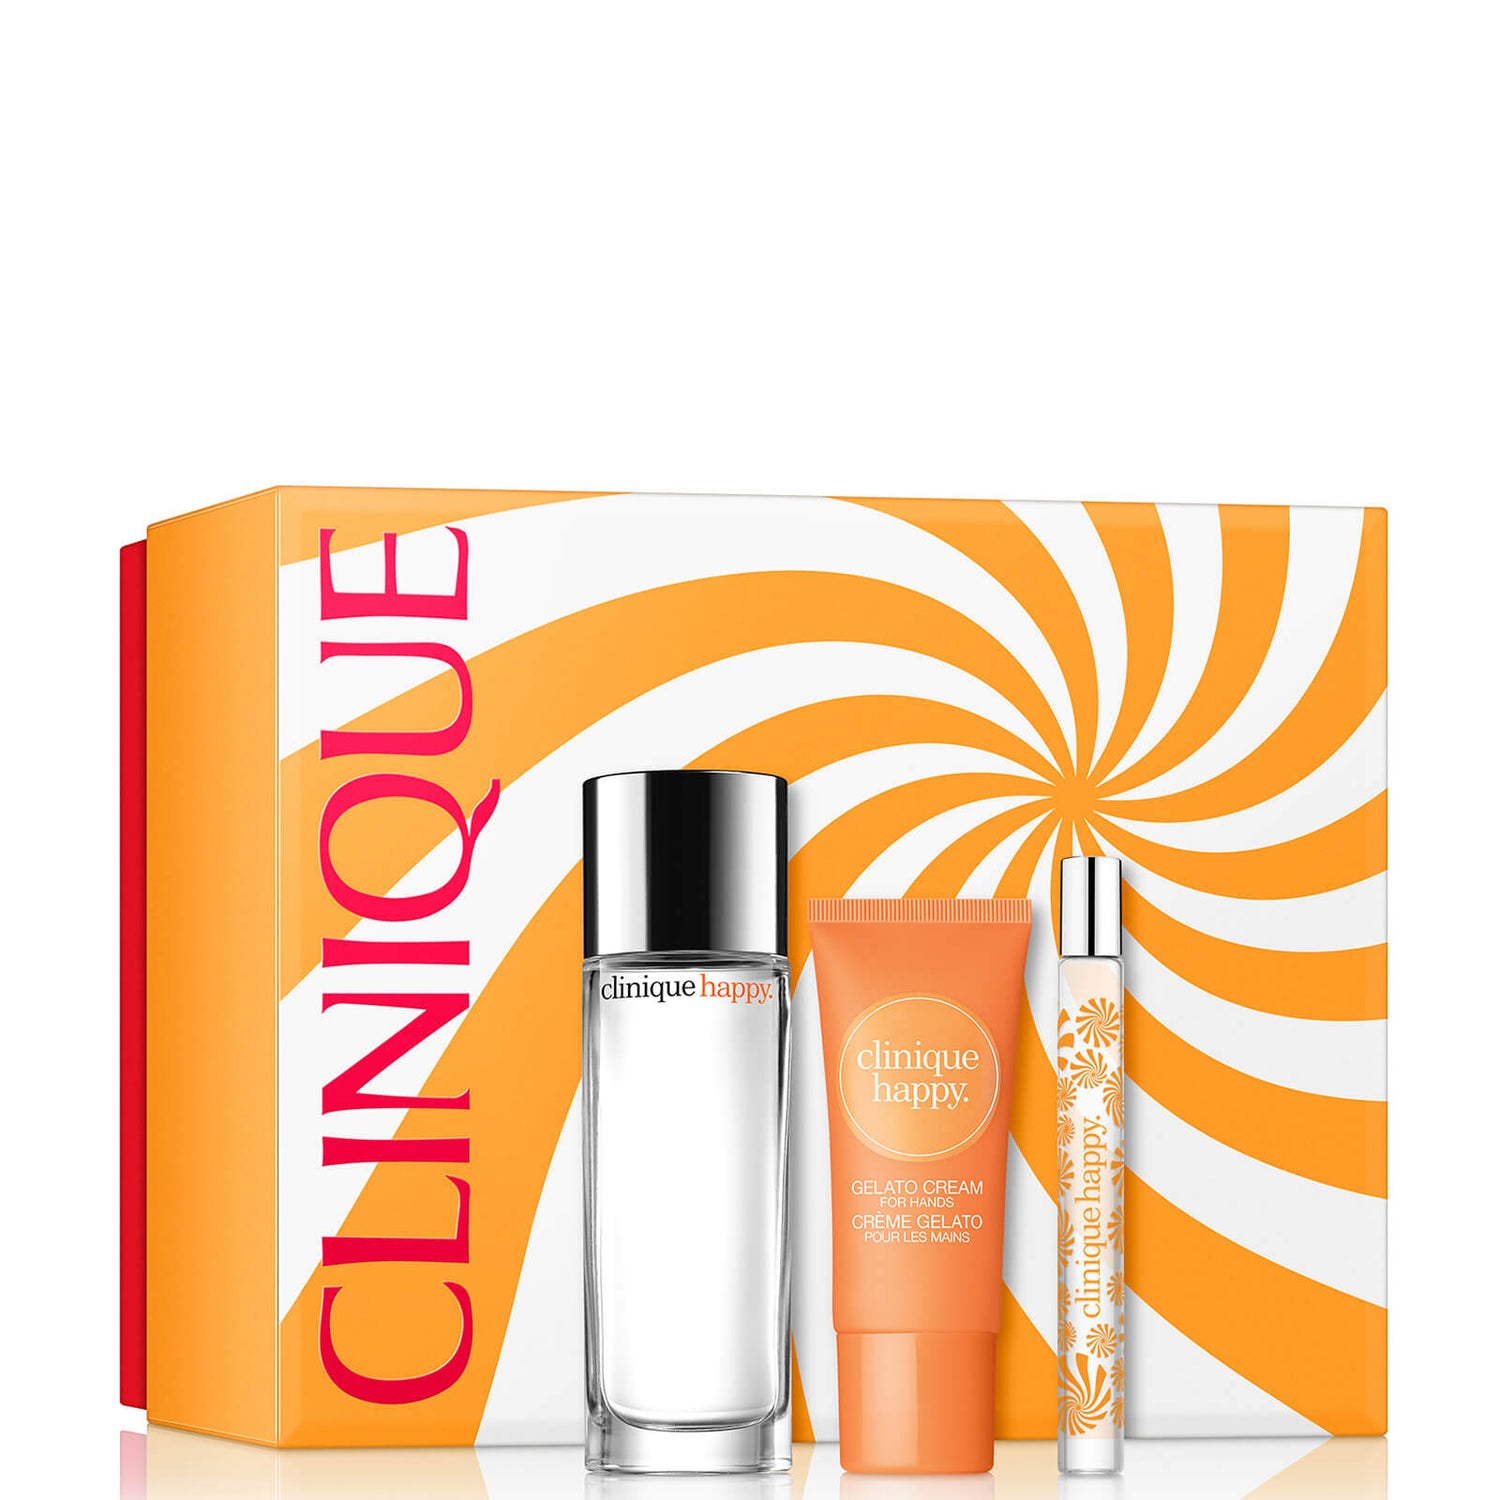 Clinique Wear It And Be Happy Set (värde £53.00)